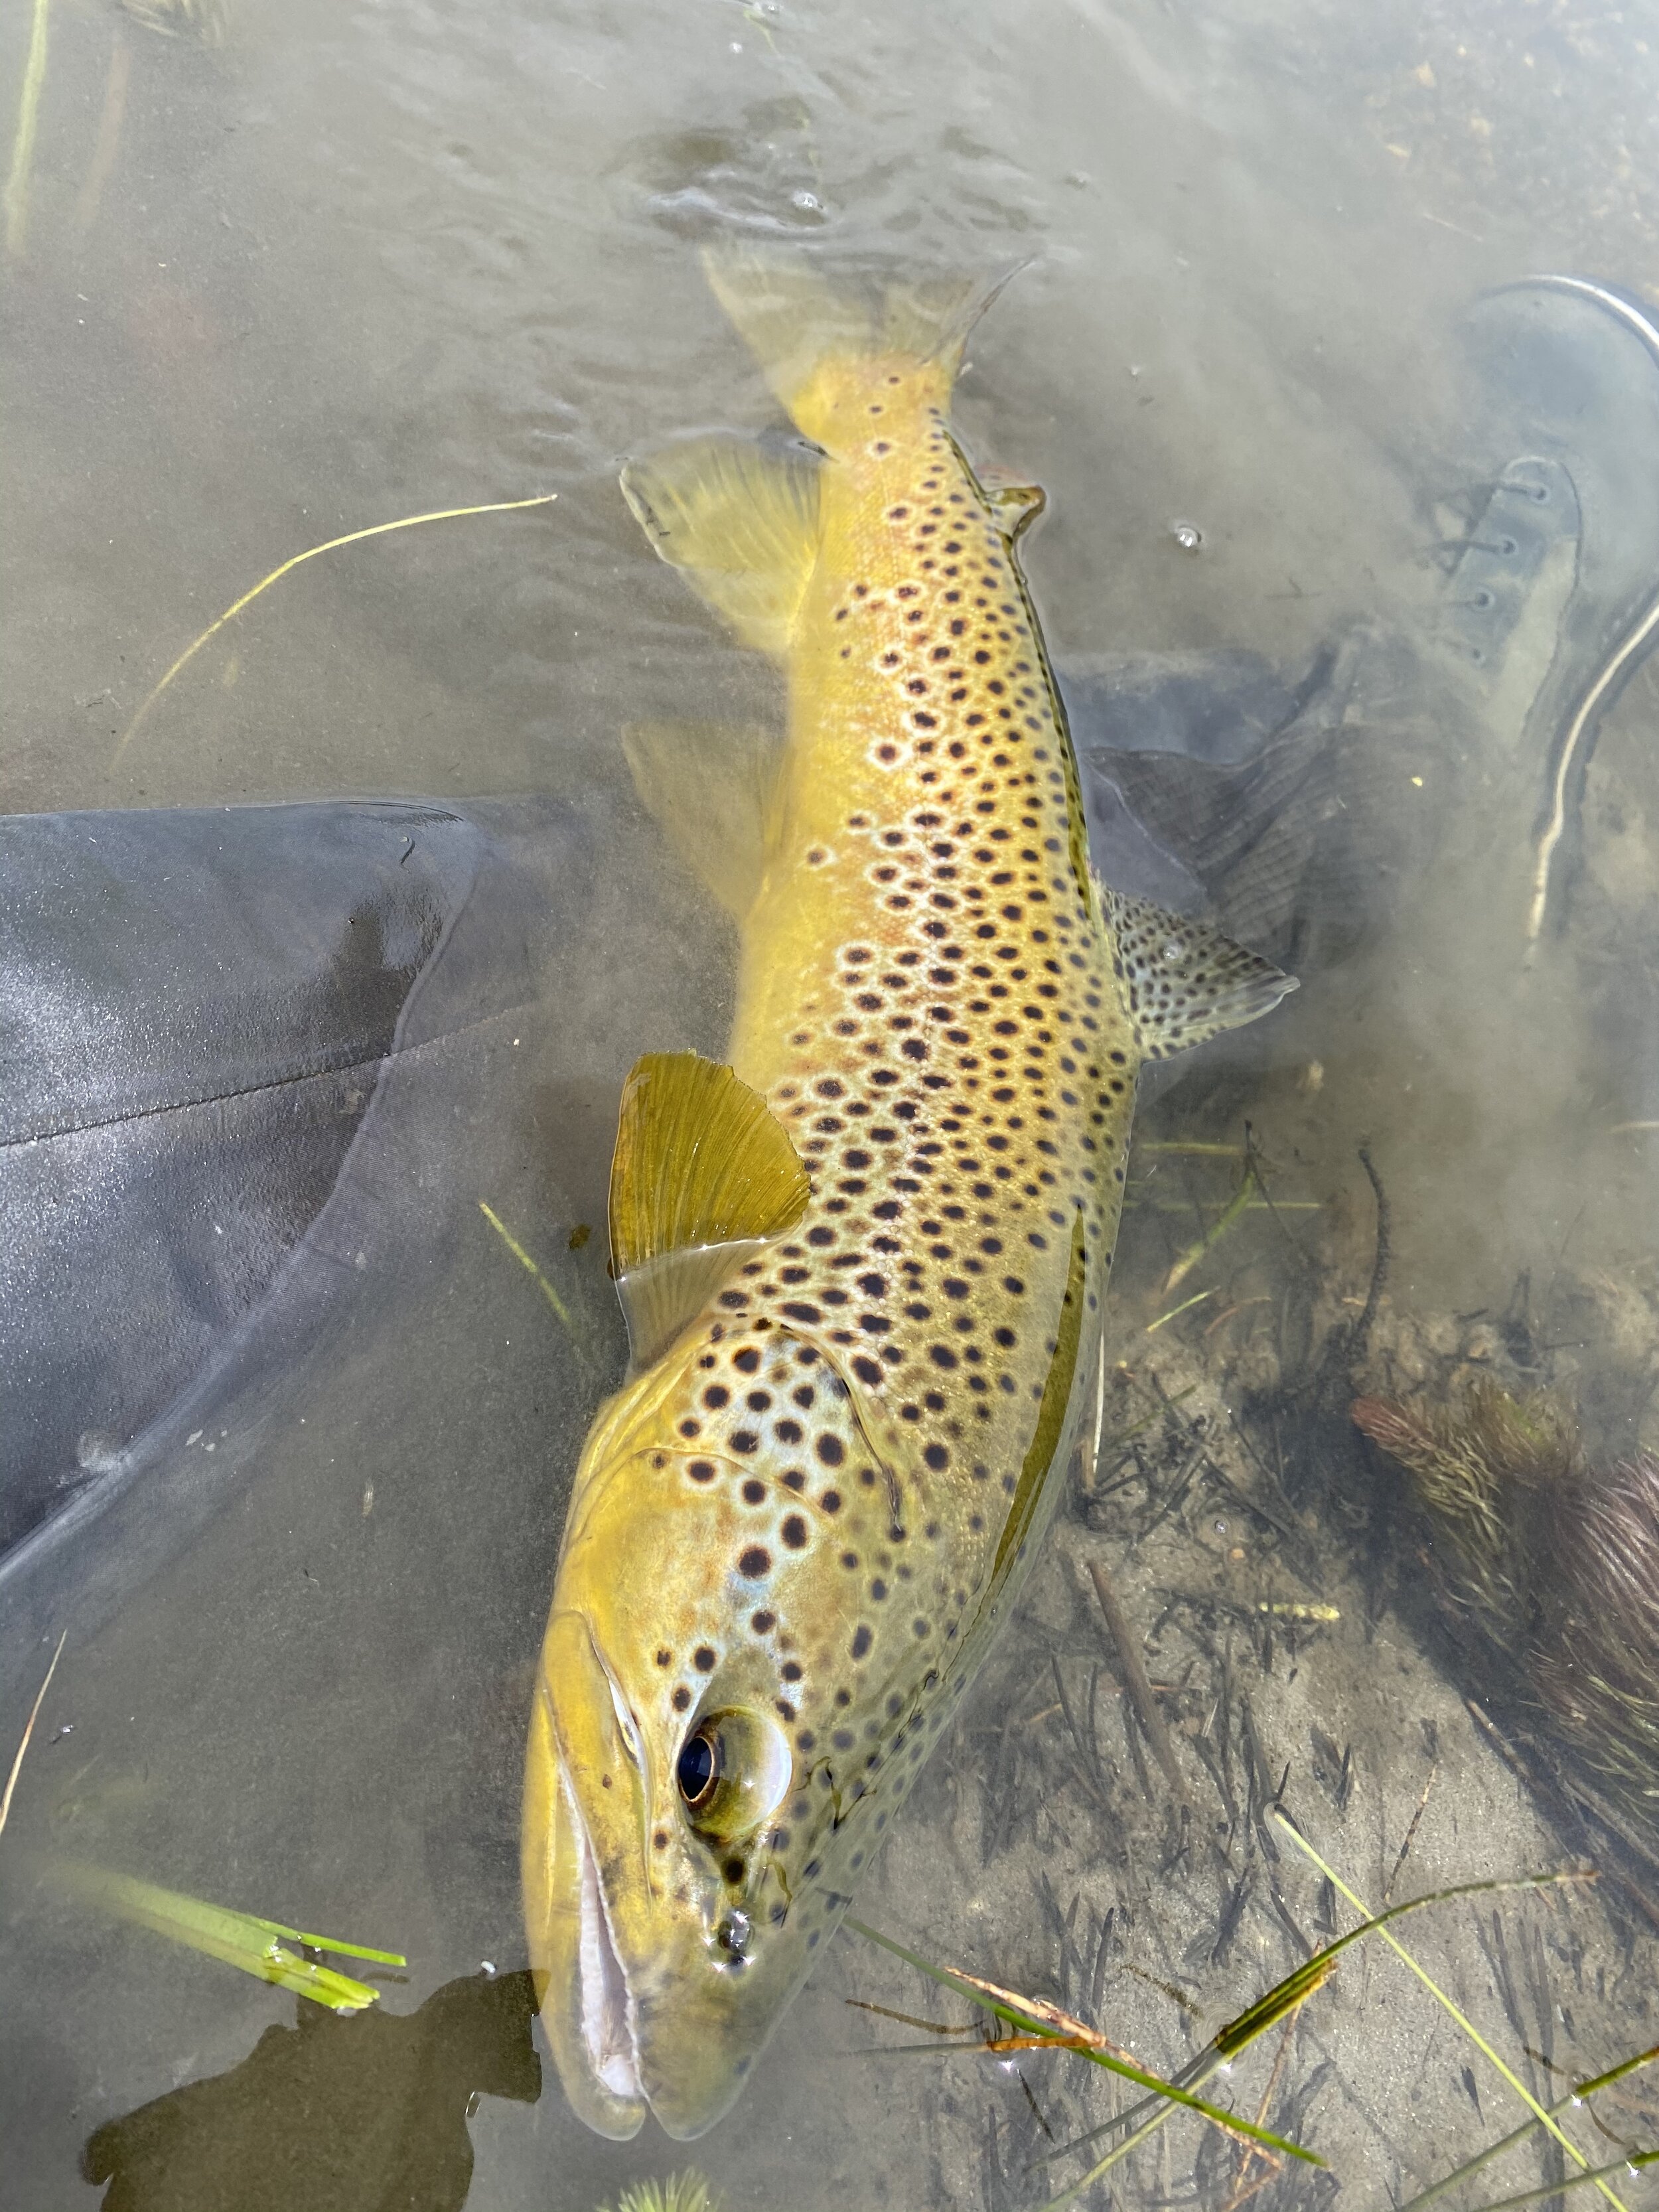 Why Do I Fish? — YELLOWSTONE CONSERVATION AND FLY FISHING WITH